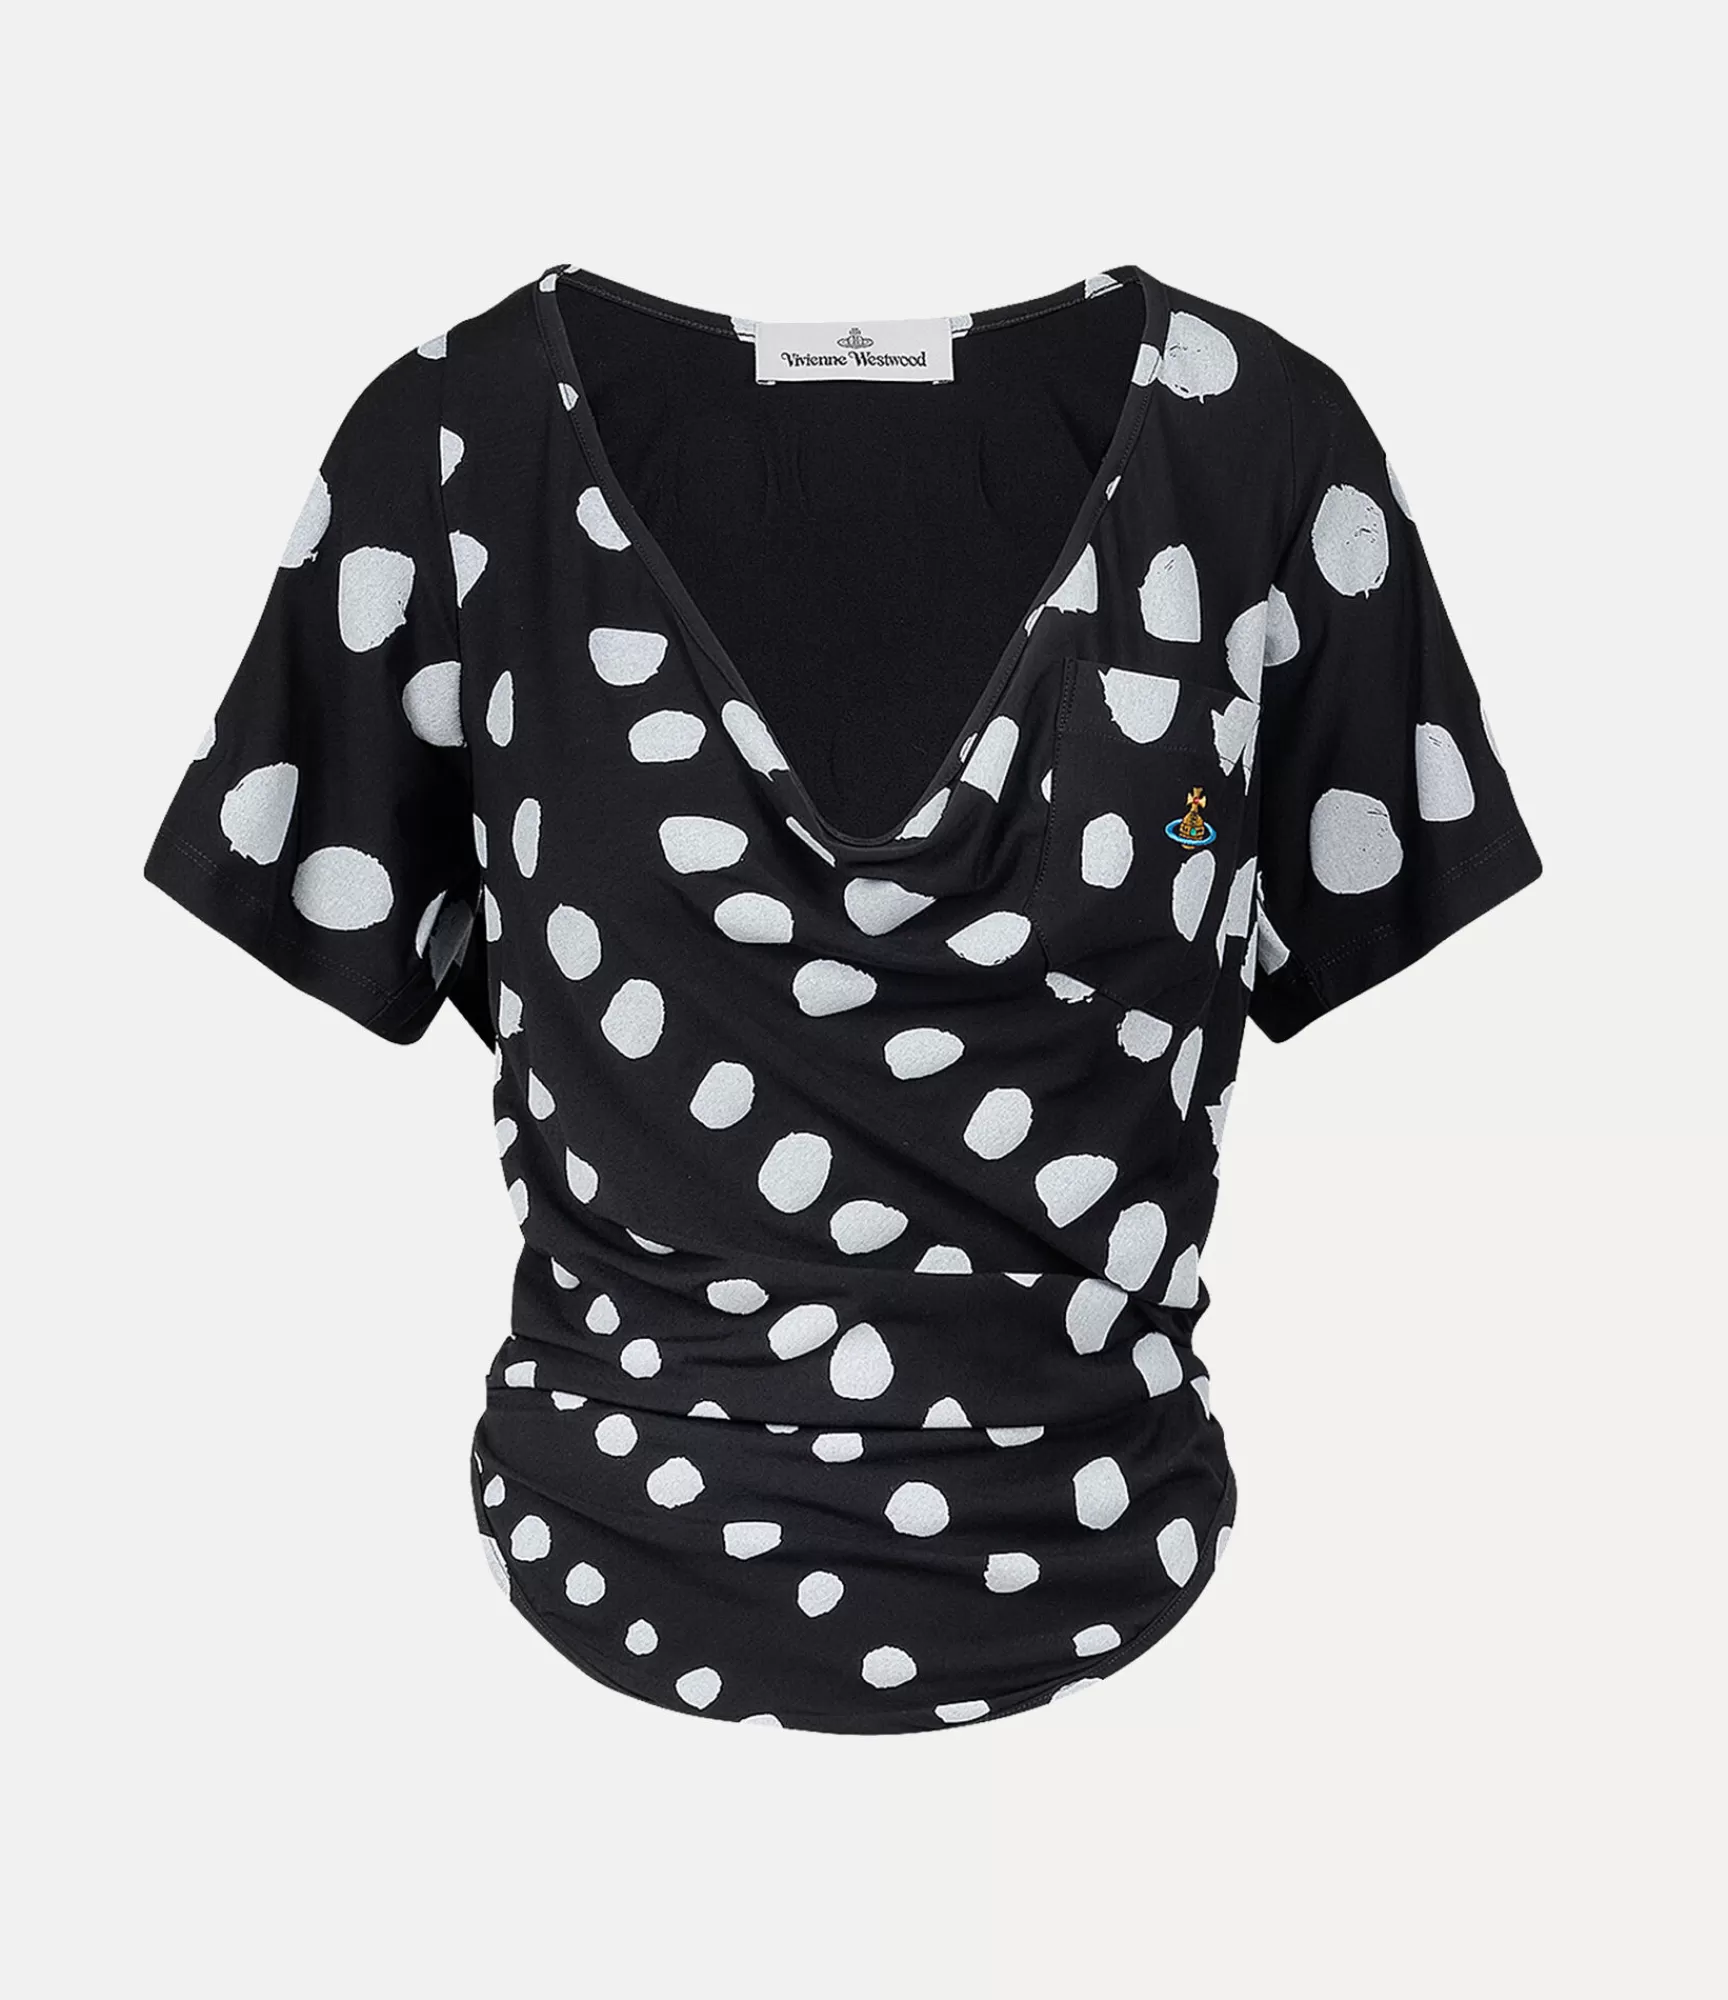 Vivienne Westwood Tops and Shirts*Marea top Dots